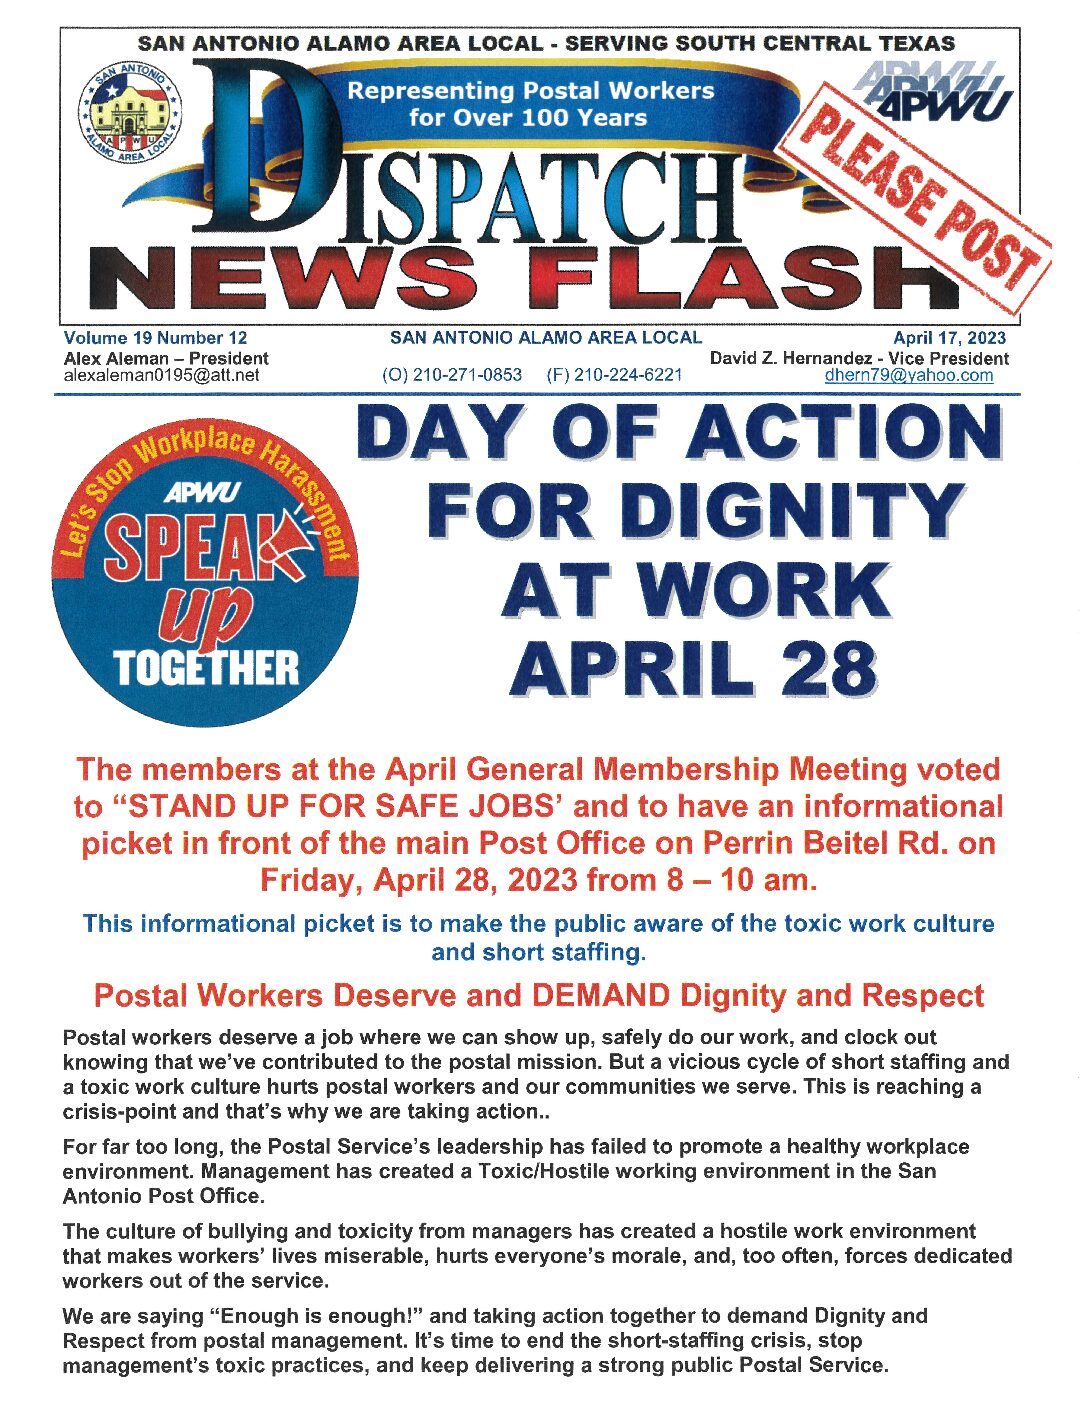 NewsFlash 19-12 Day of Action for Dignity at Work April 28 - 